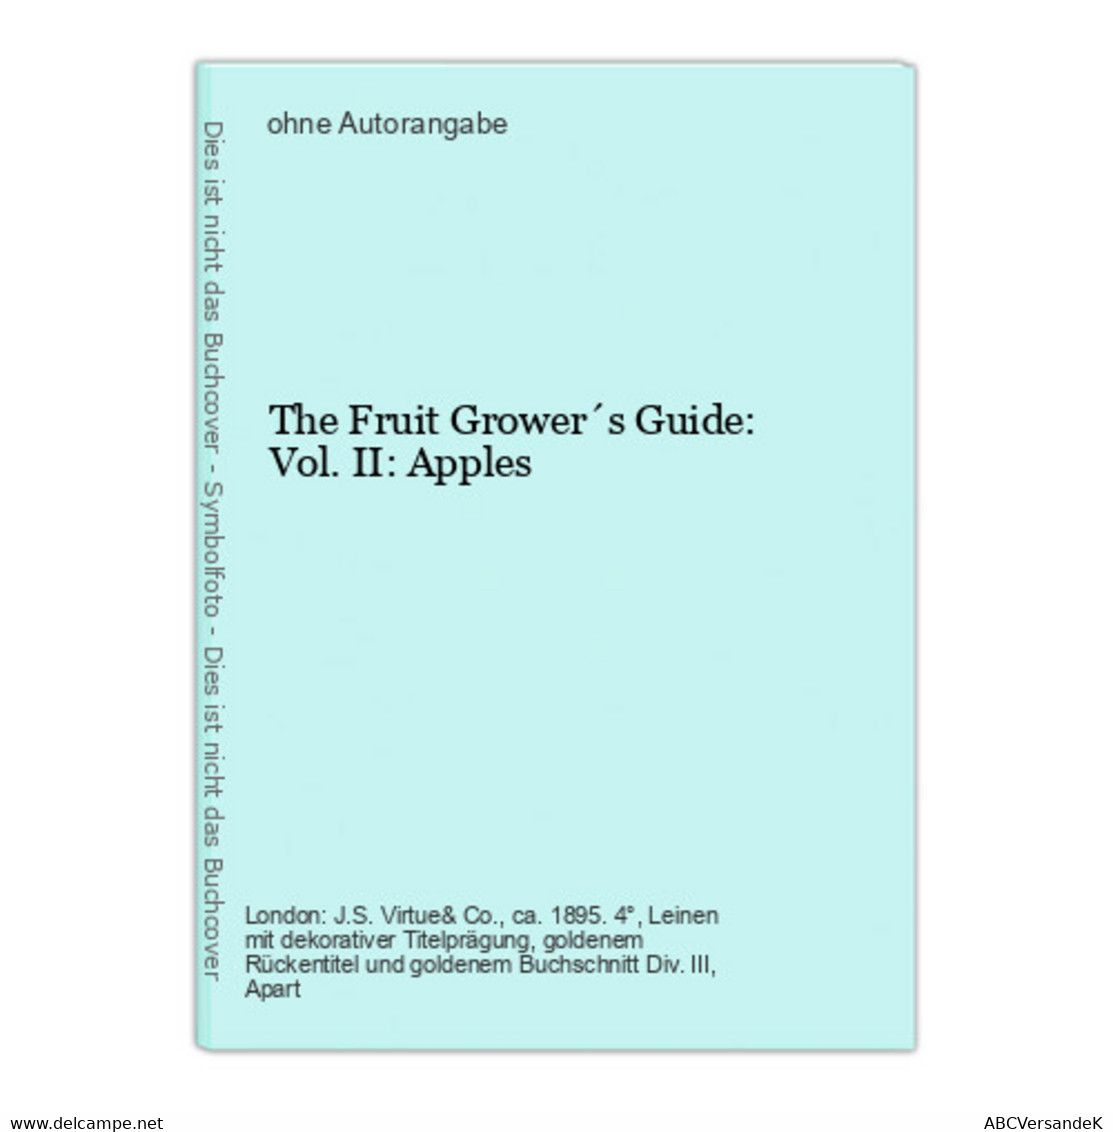 The Fruit Grower's Guide: Vol. II: Apples - Nature